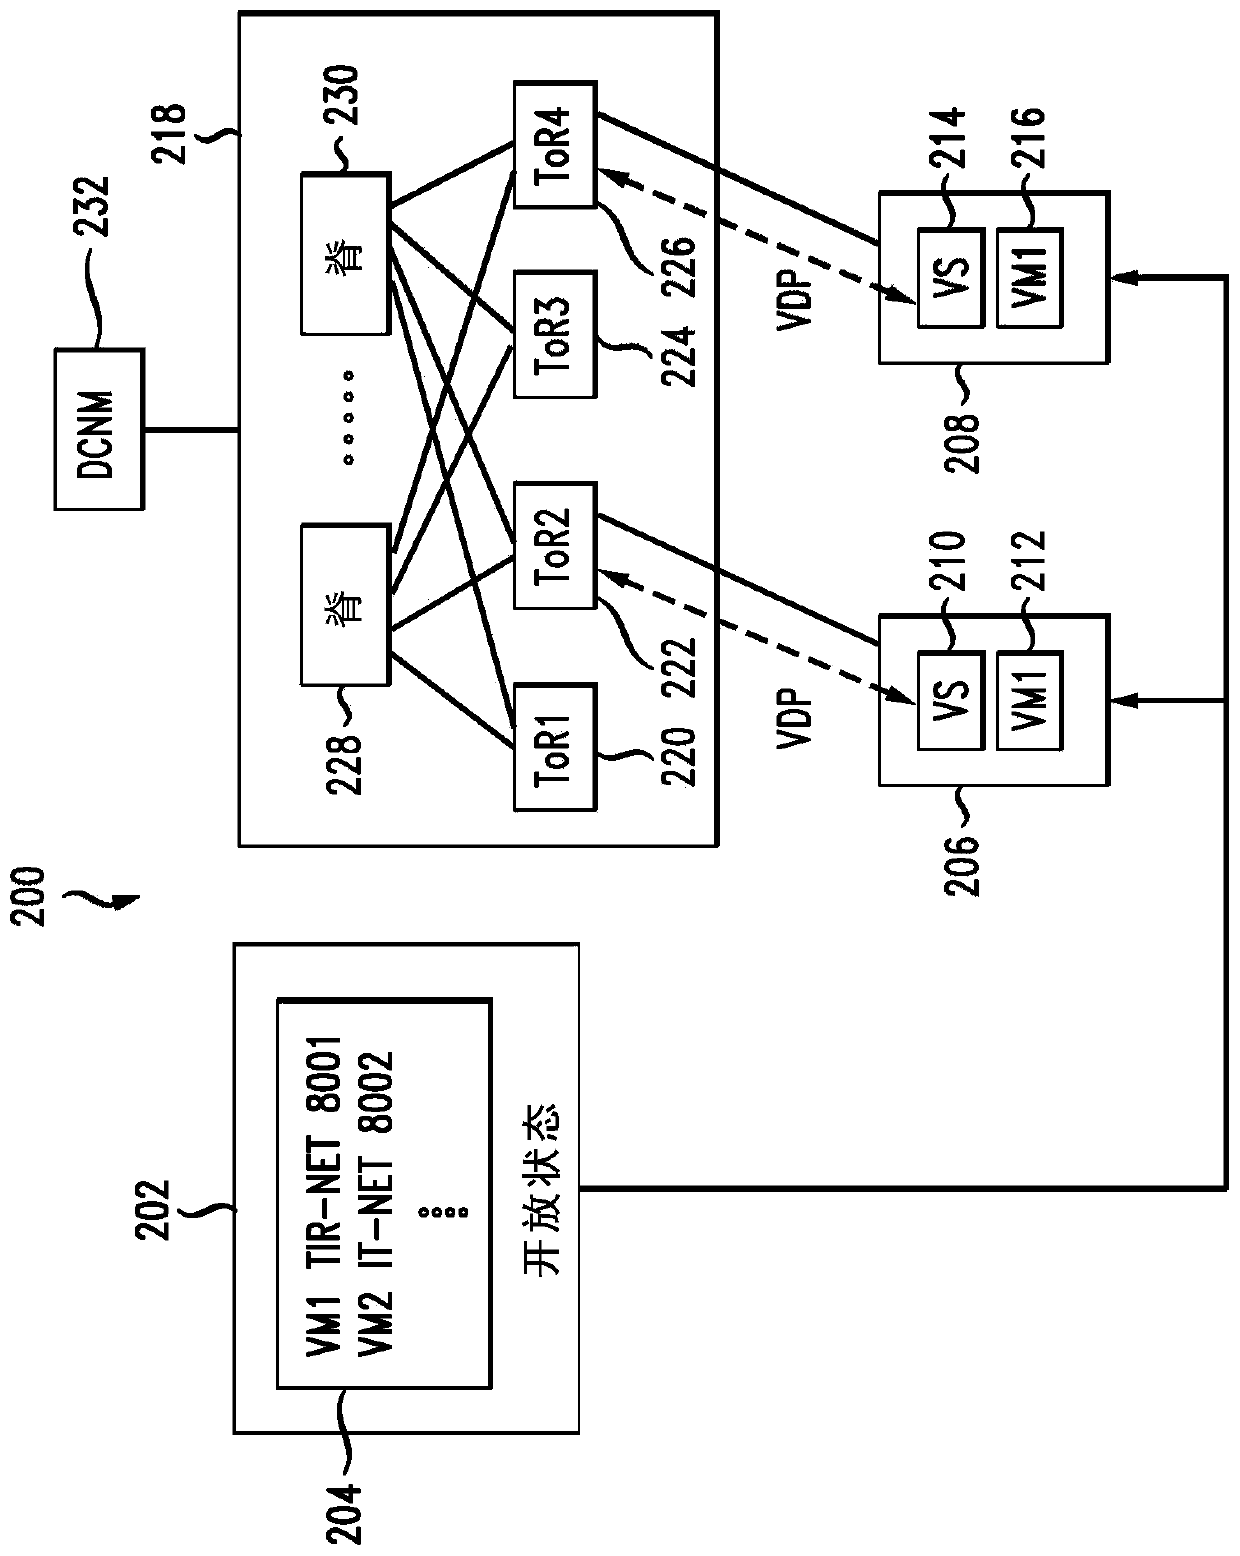 System and method for applying machine learning algorithms to compute health scores for workload scheduling